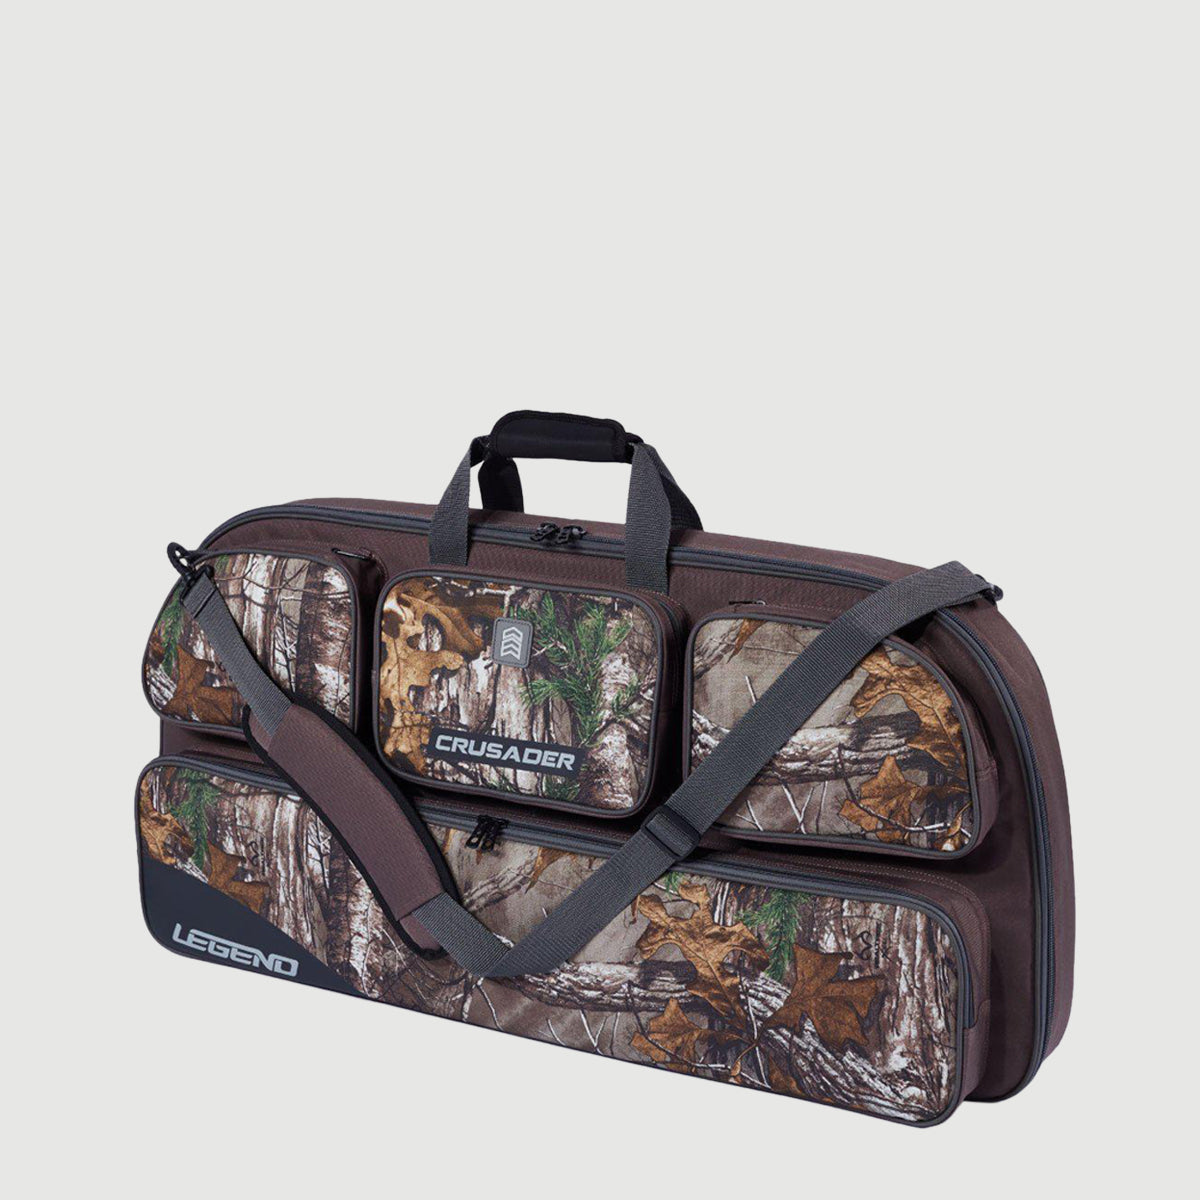 Crusader Bow Case from Legend Archery